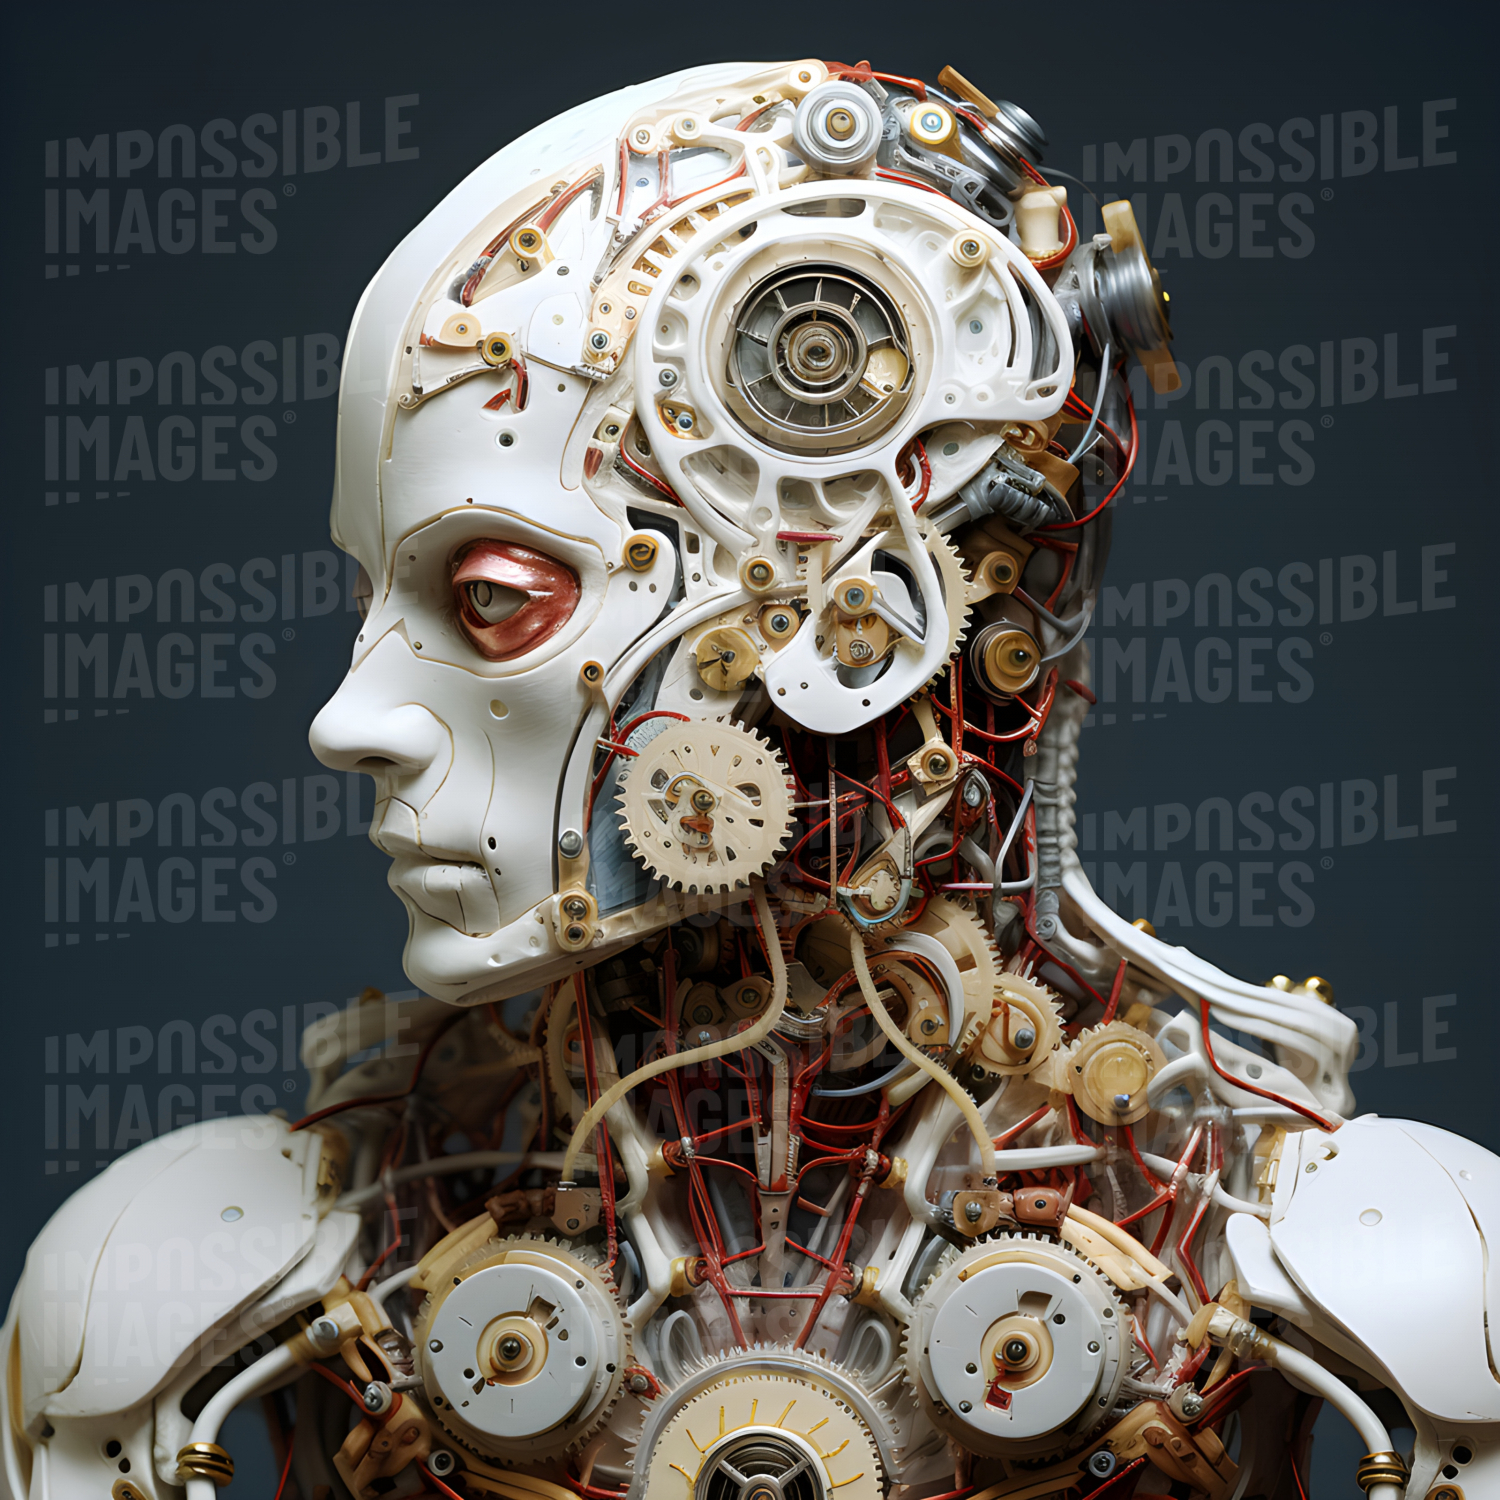 Ornate model of a stylised human head with complex clockwork inside -  An intricately crafted model of a stylised human head, with a complex clockwork mechanism inside, intricately designed and decorated.